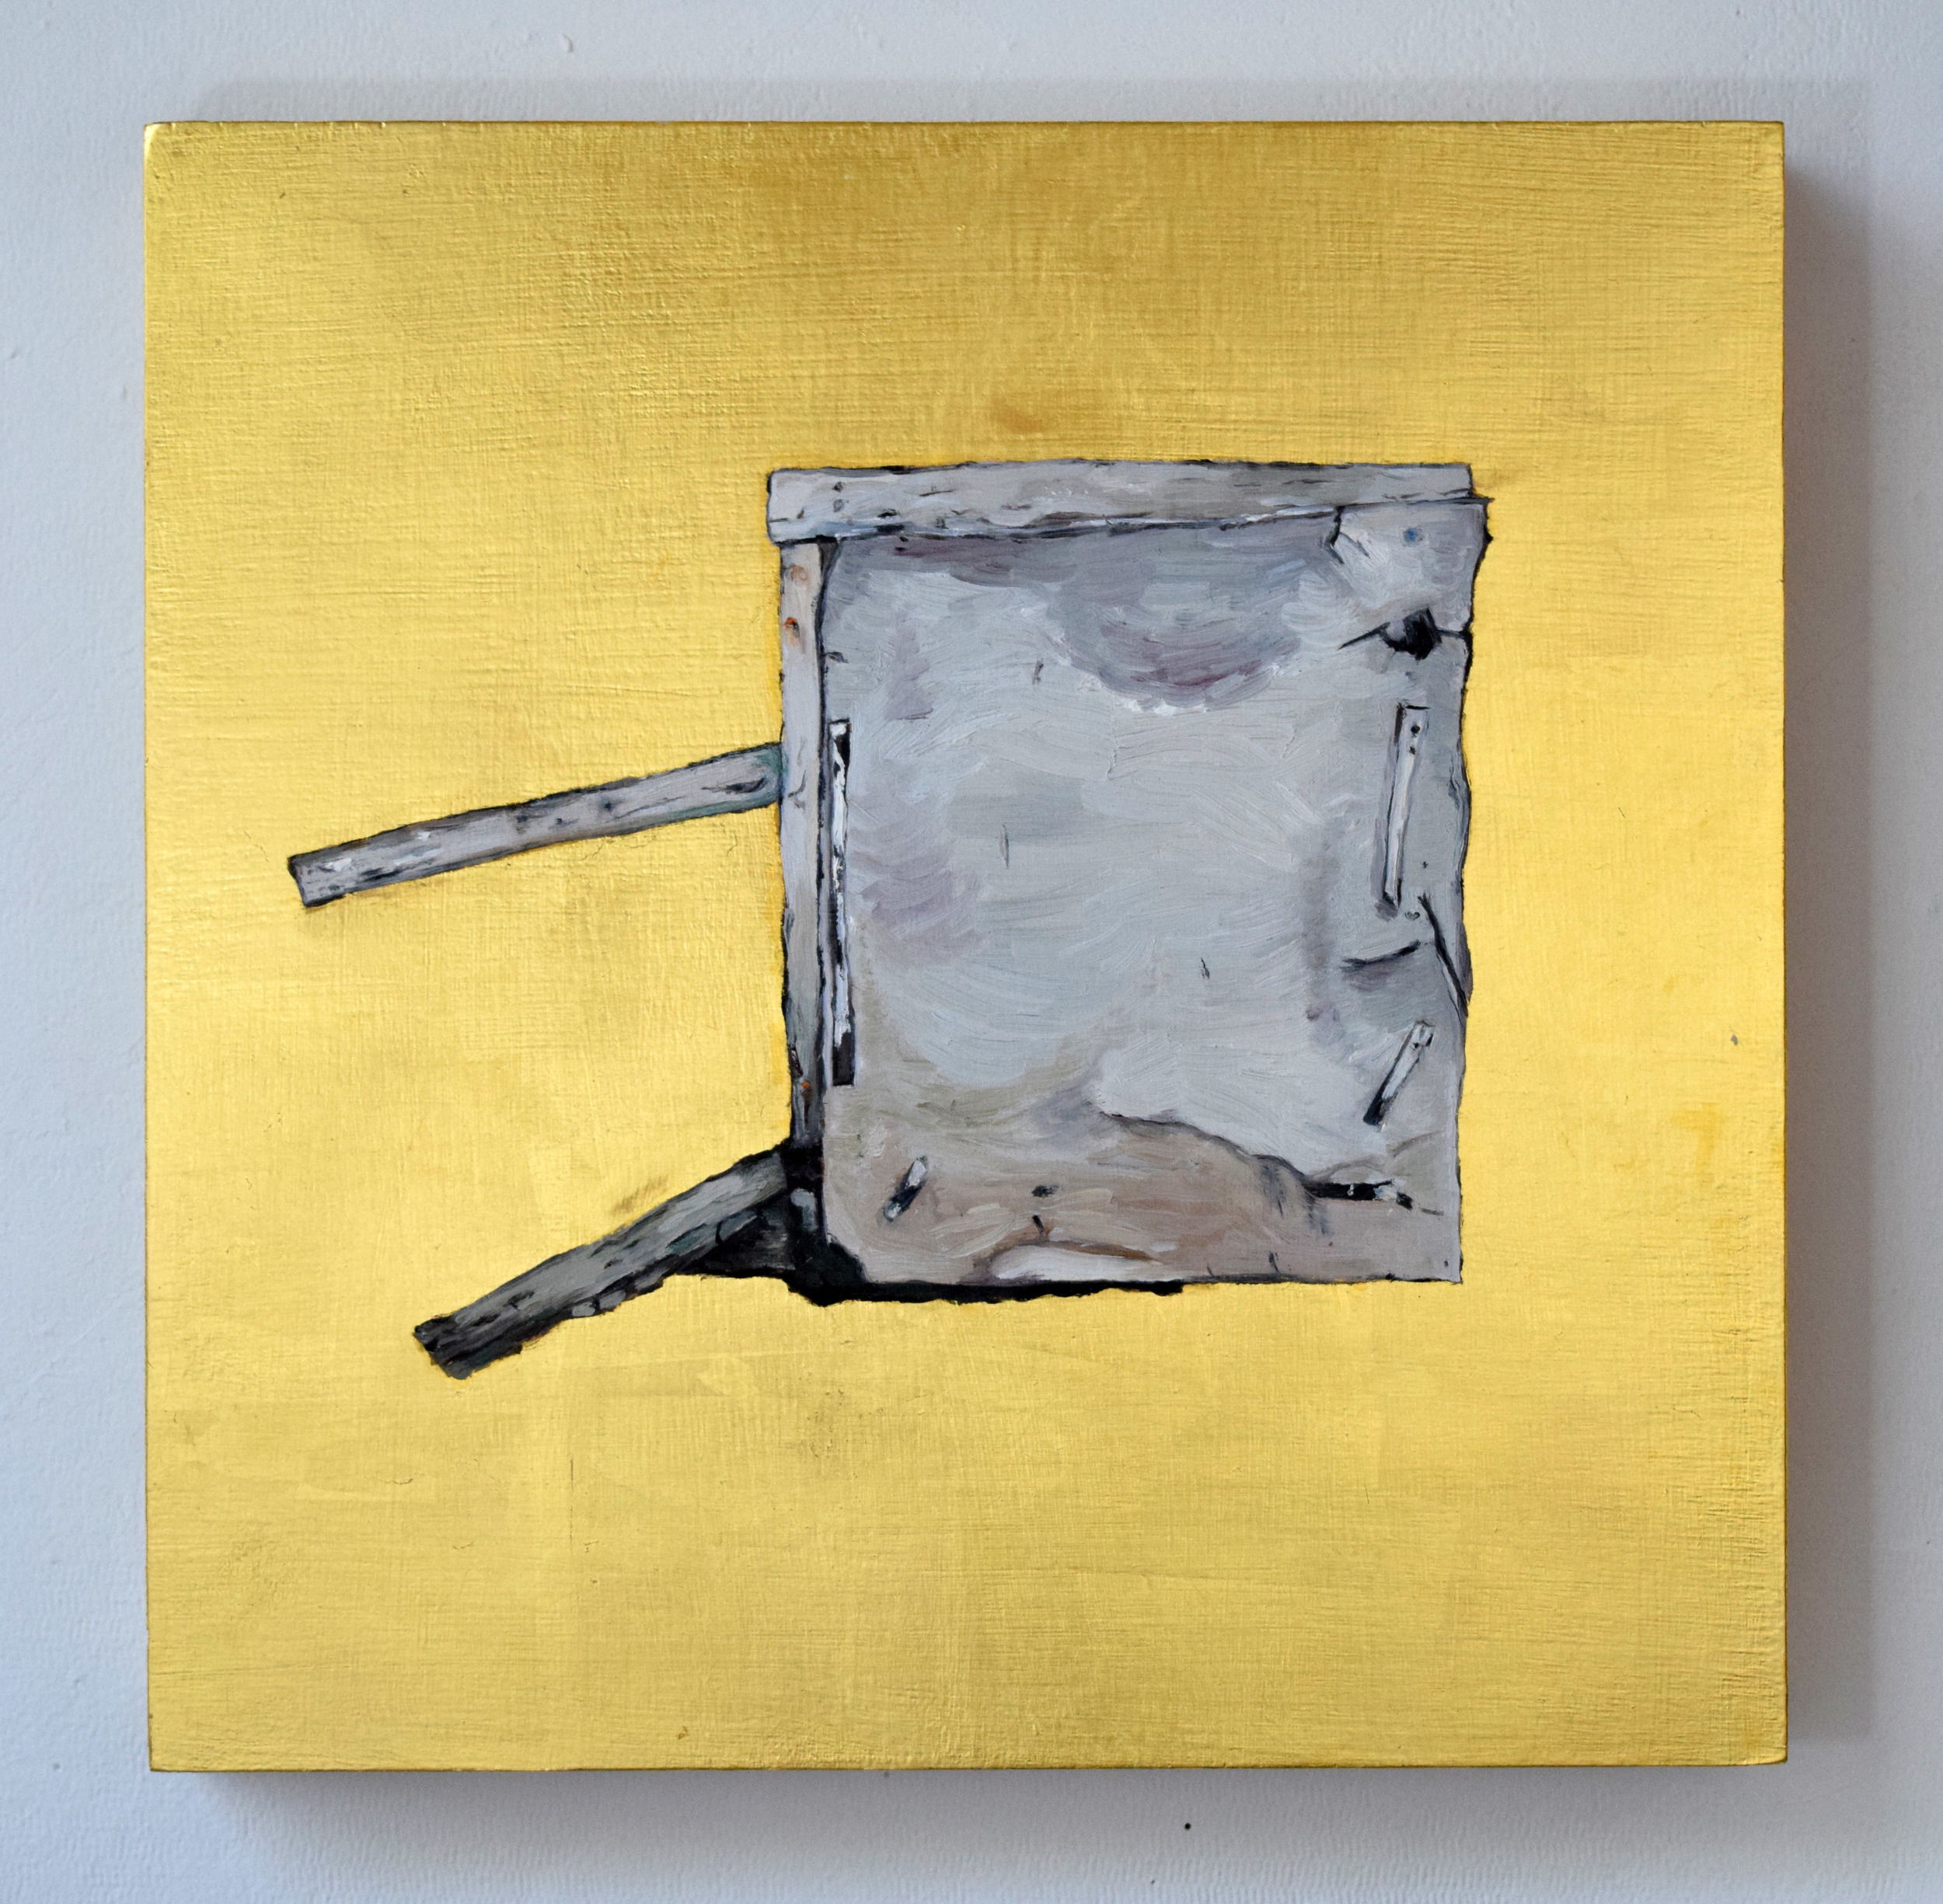  Waitsfield I, Oil and Gold Leaf on Panel, 2016 